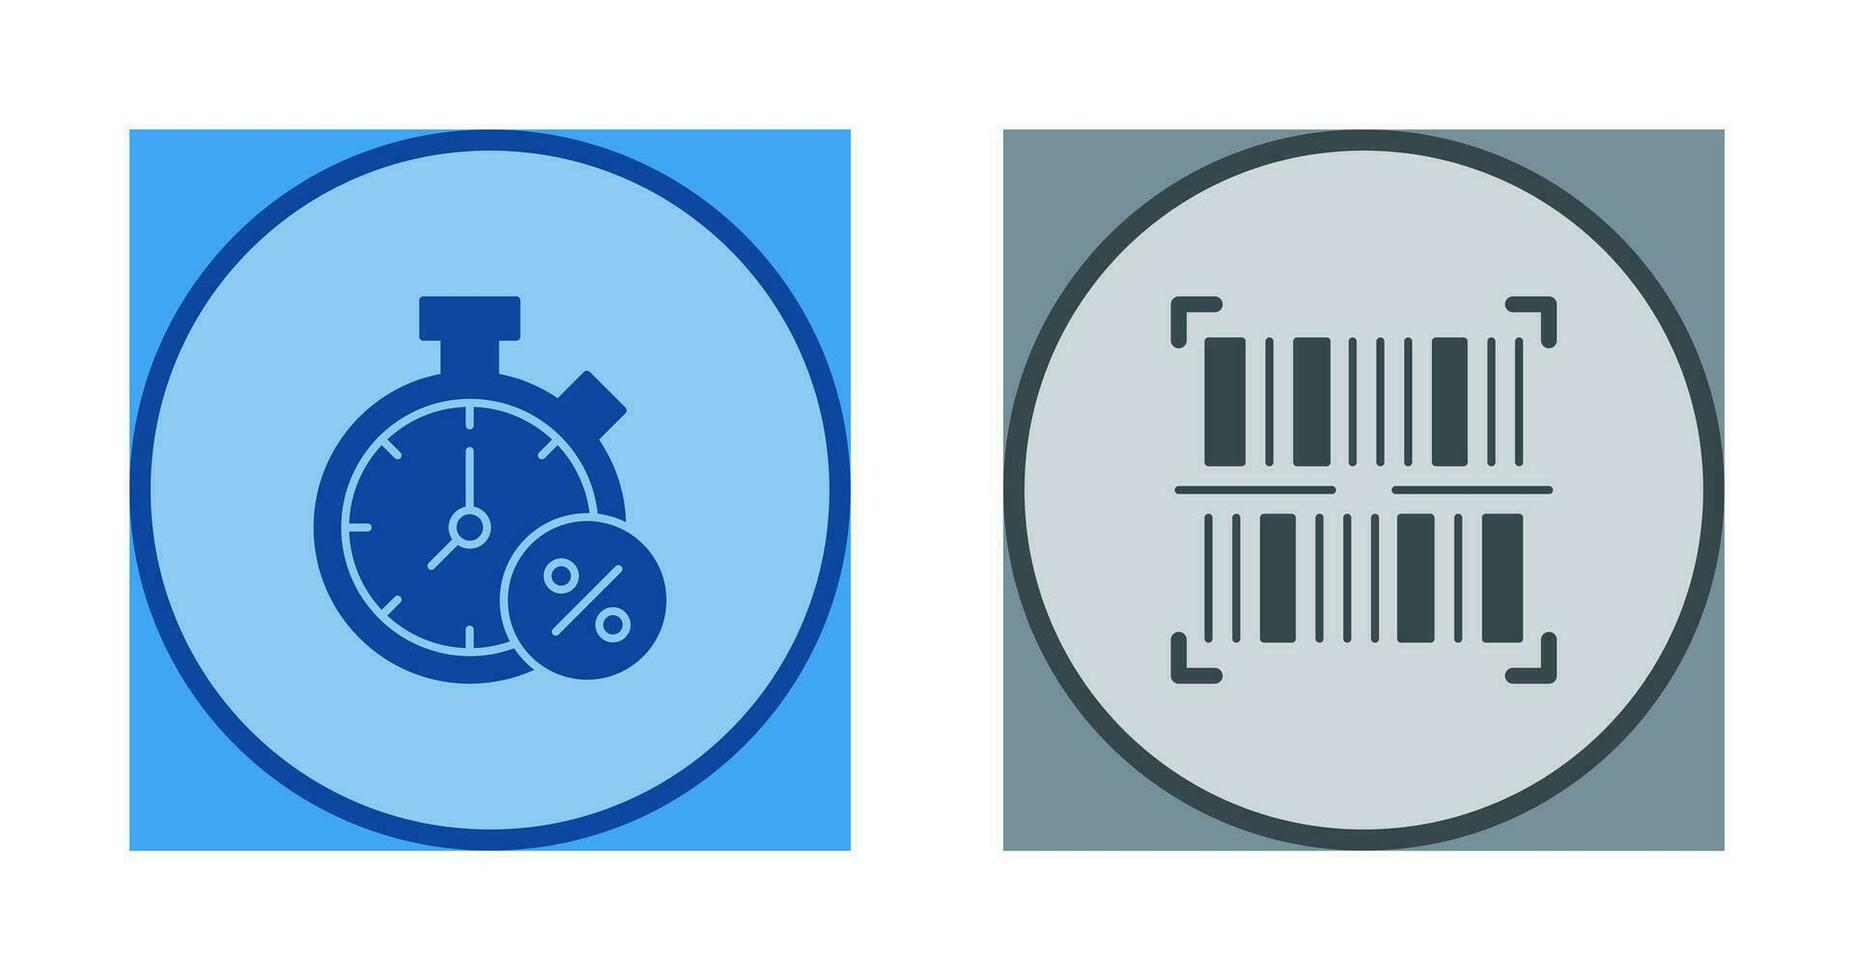 Timer and BarCode Icon vector